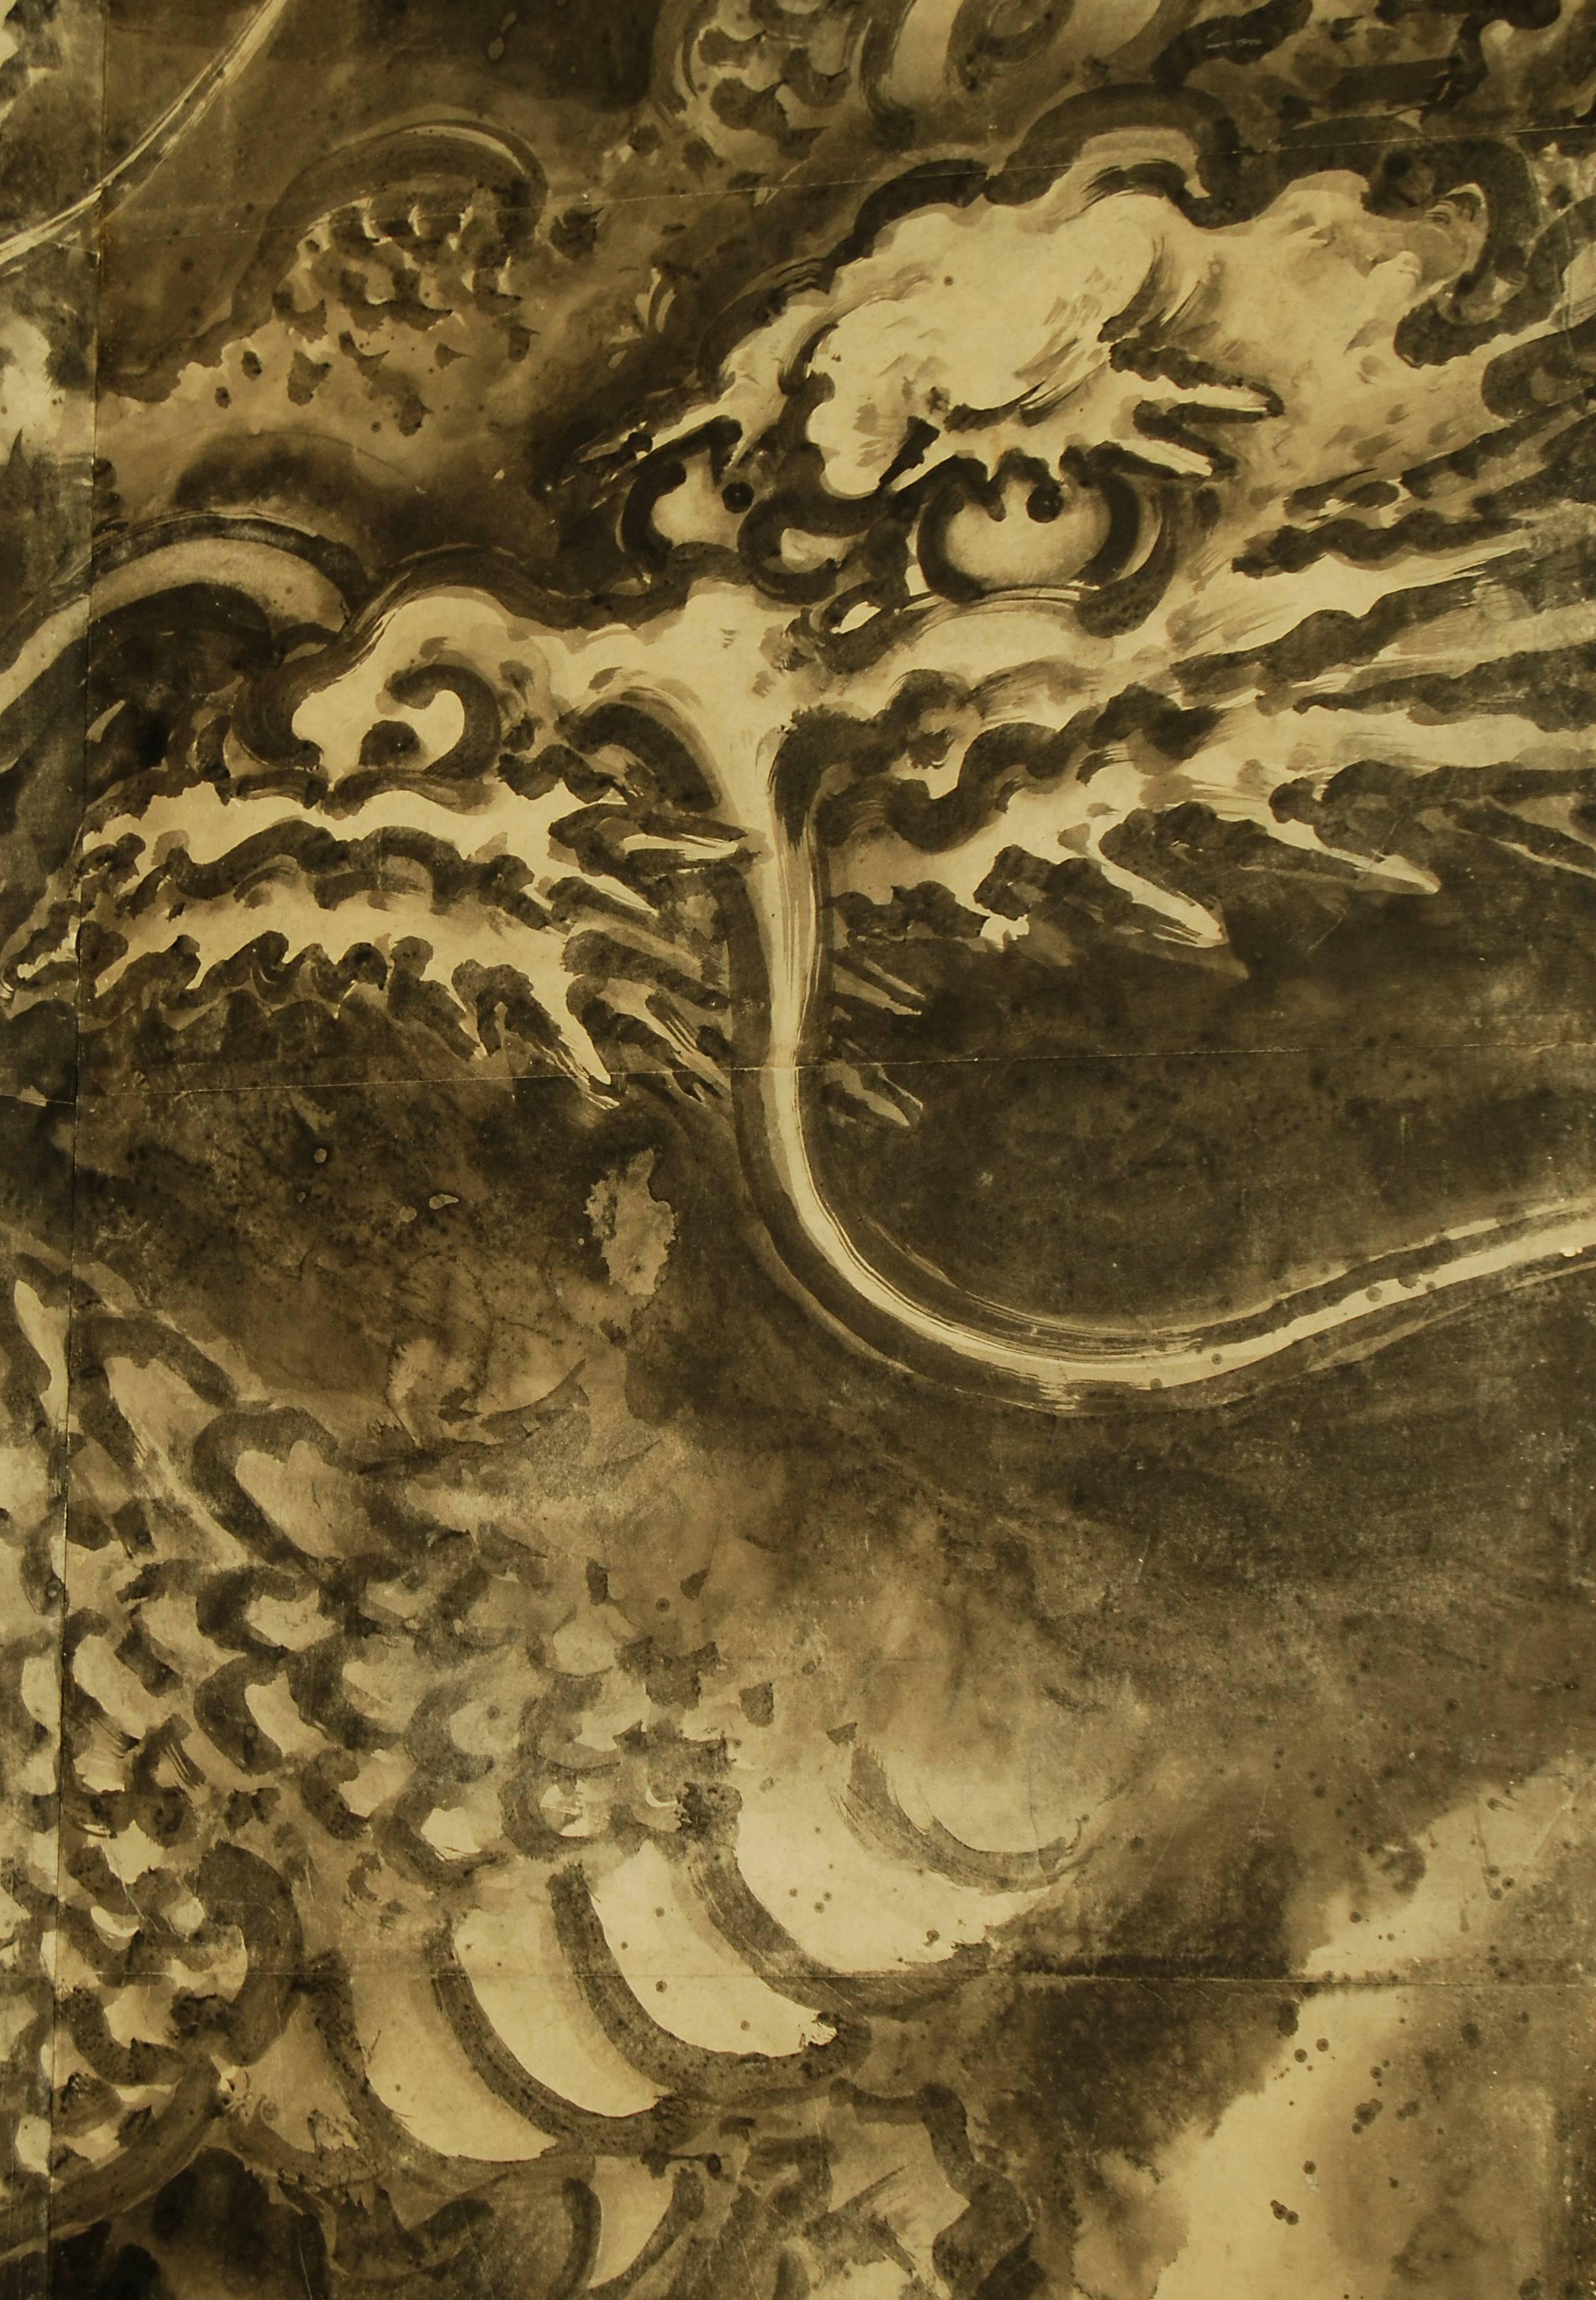 Japanese six-panel Kano School screen with a boldly painted depiction of a writhing dragon, rendered in ink on paper. Attributed to Kano Tanyu (1602-1674), 17th century signed and sealed.

Dimensions: H 173 cm x W 370 cm.

Here the dragon